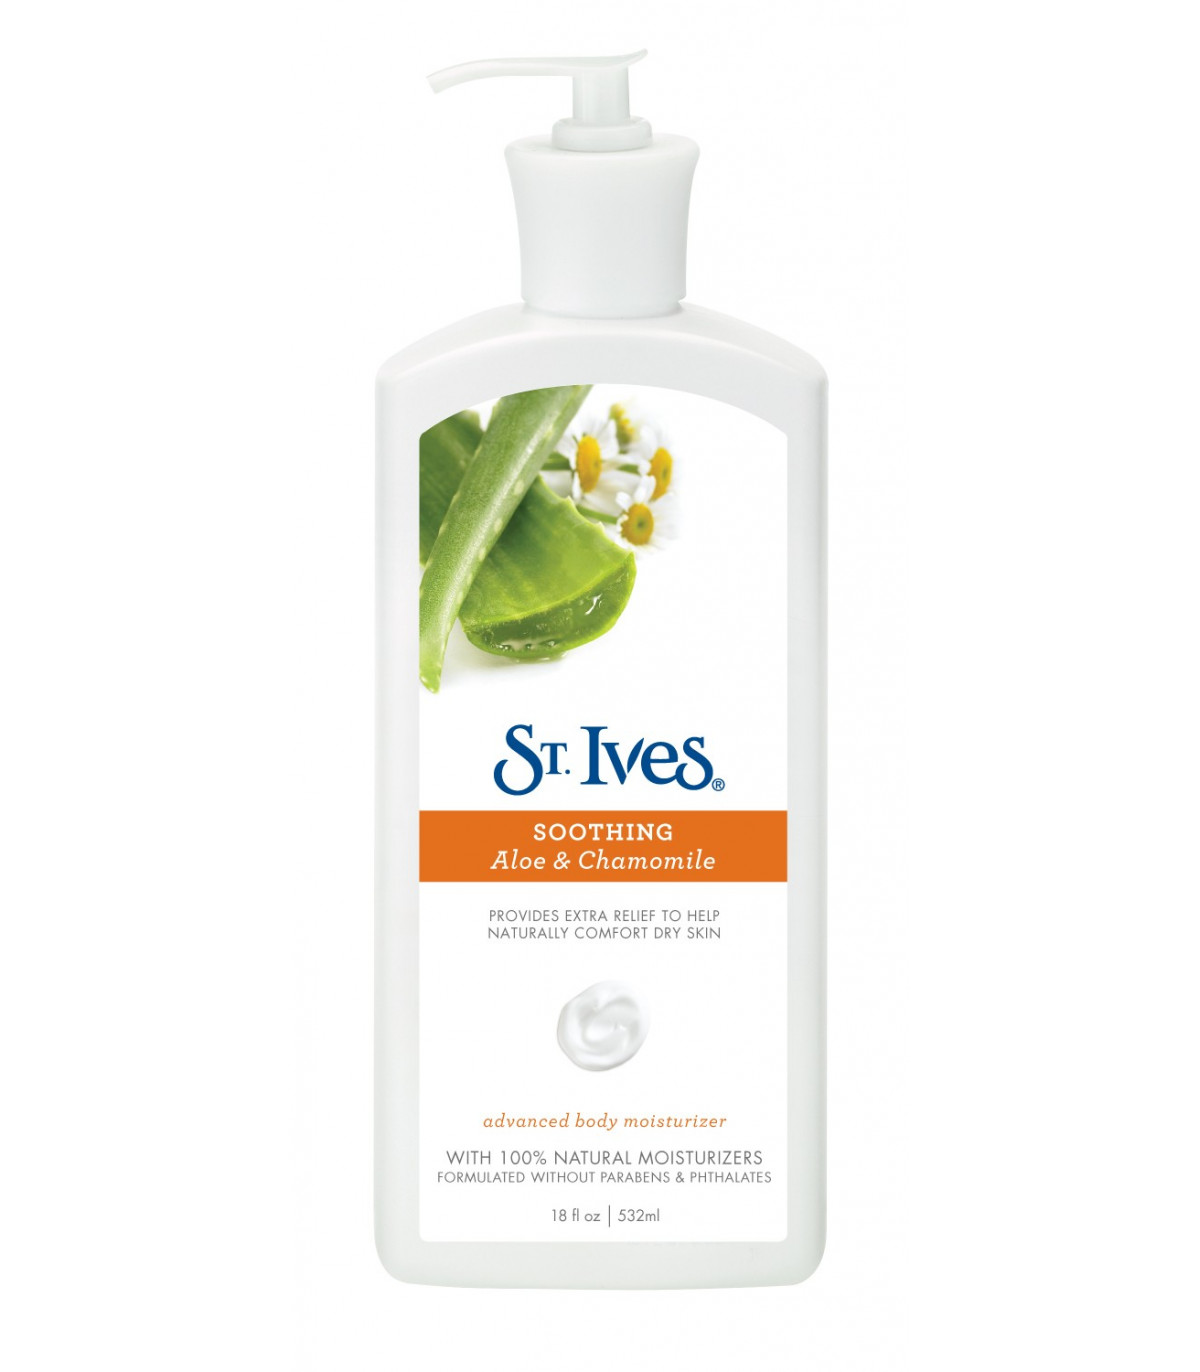 St Ives Soothing Advanced Moisturizer - 532ml